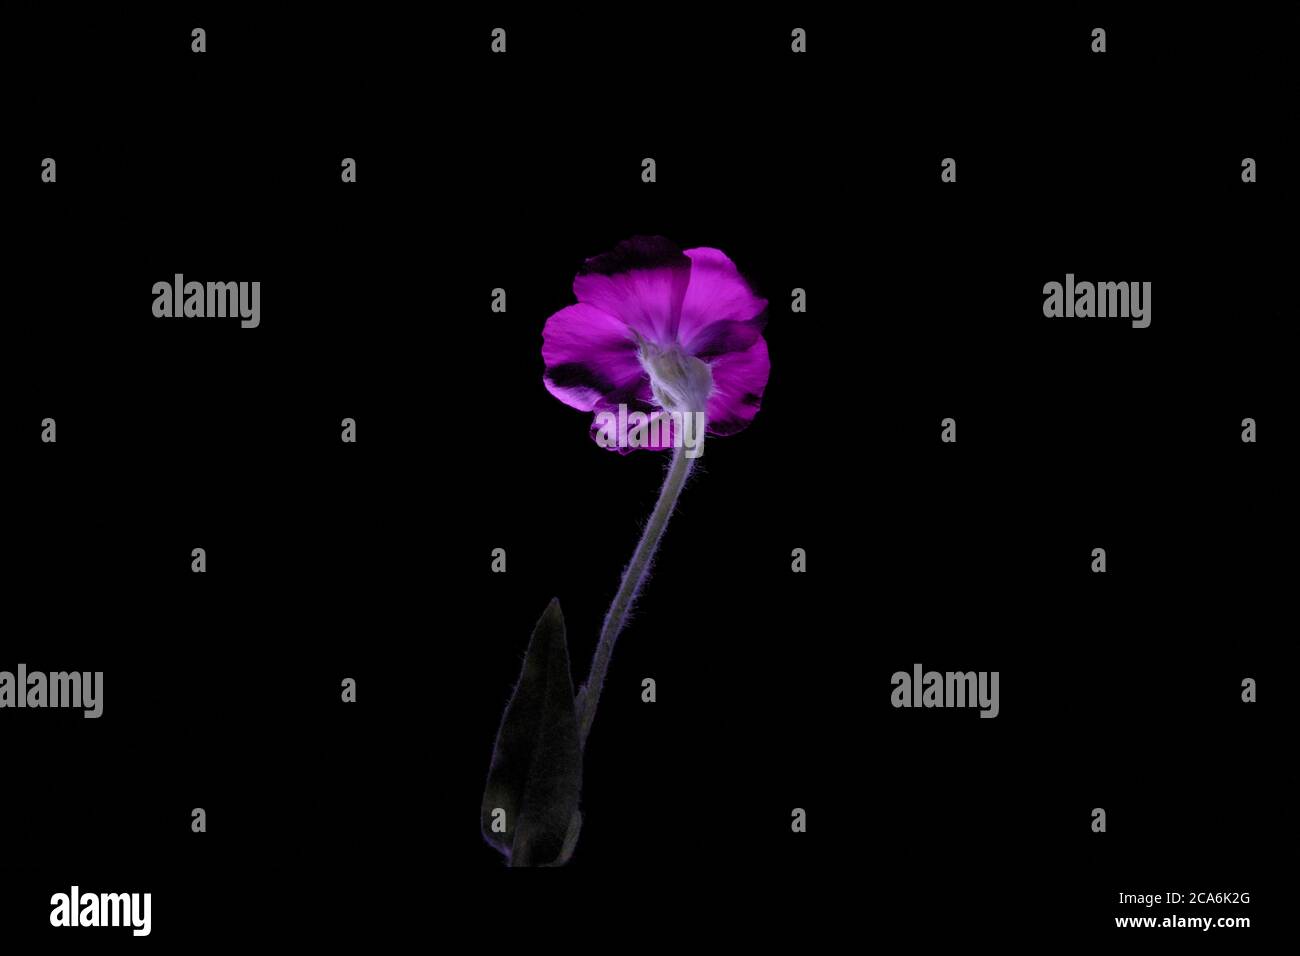 Purple flower rose campion  on a black background, also know as dusty miller,  mullein-pink  scientific name Silene coronaria Stock Photo